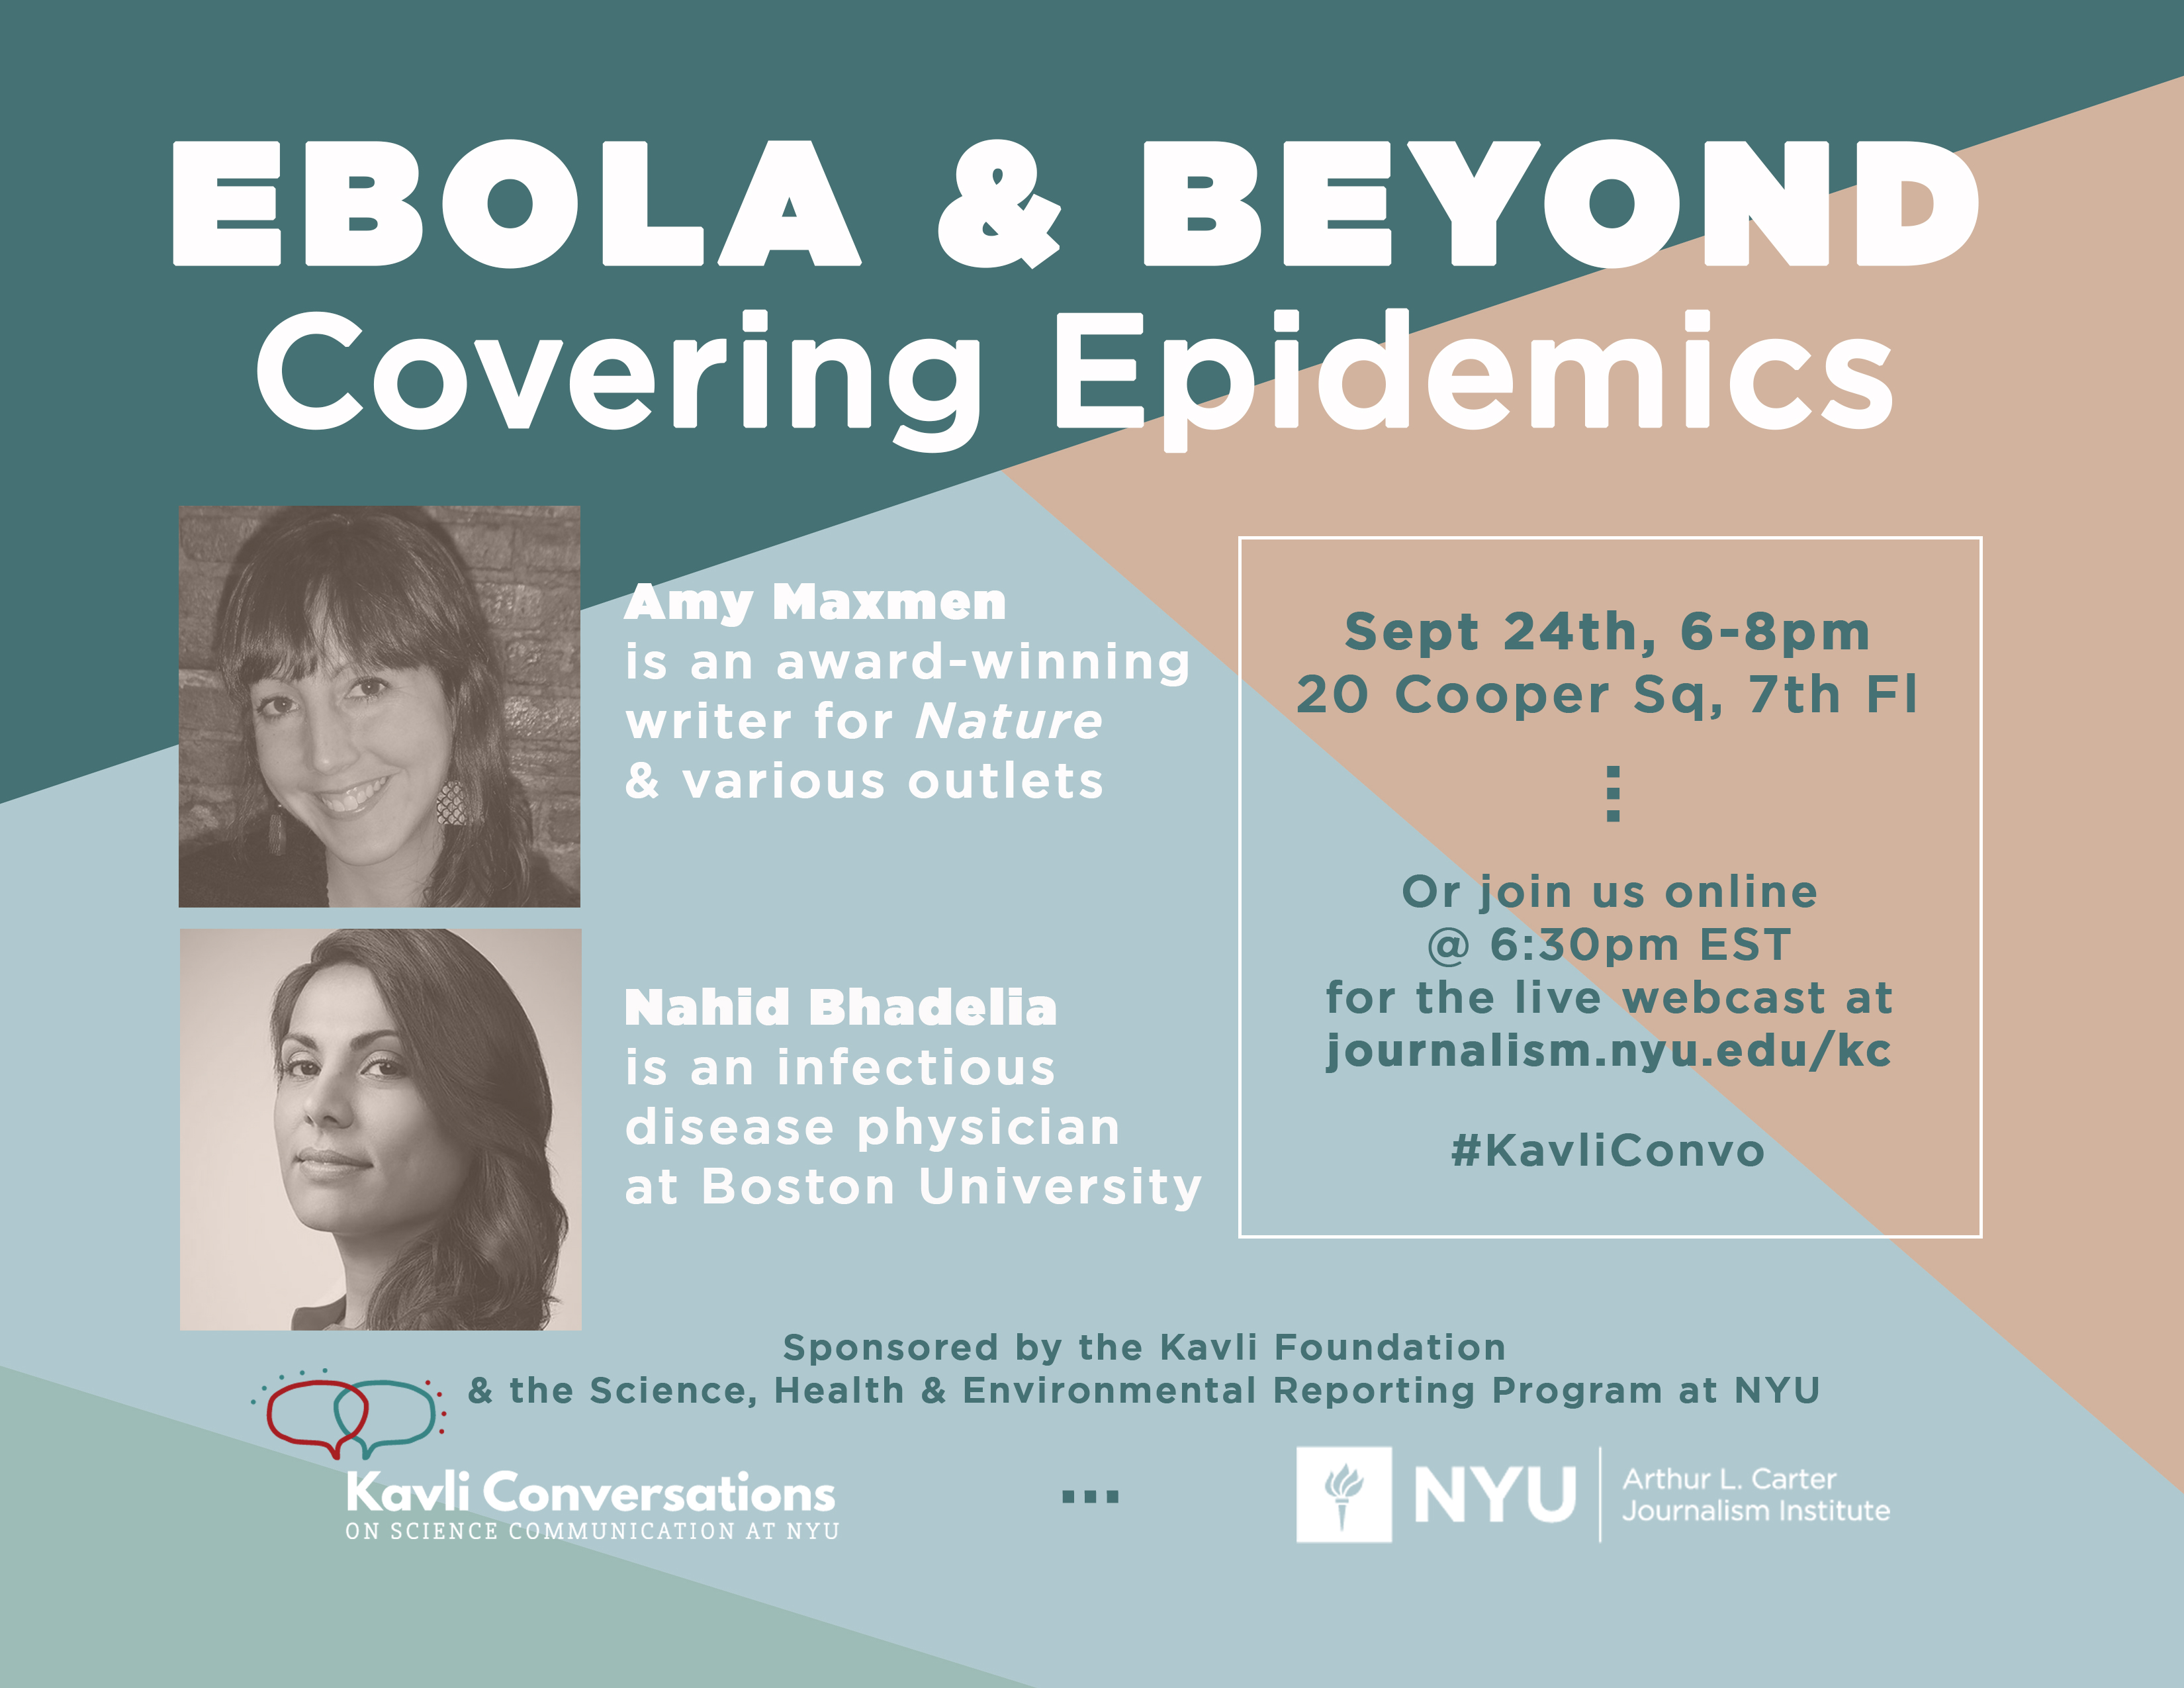 Ebola and Beyond: Covering Epidemics